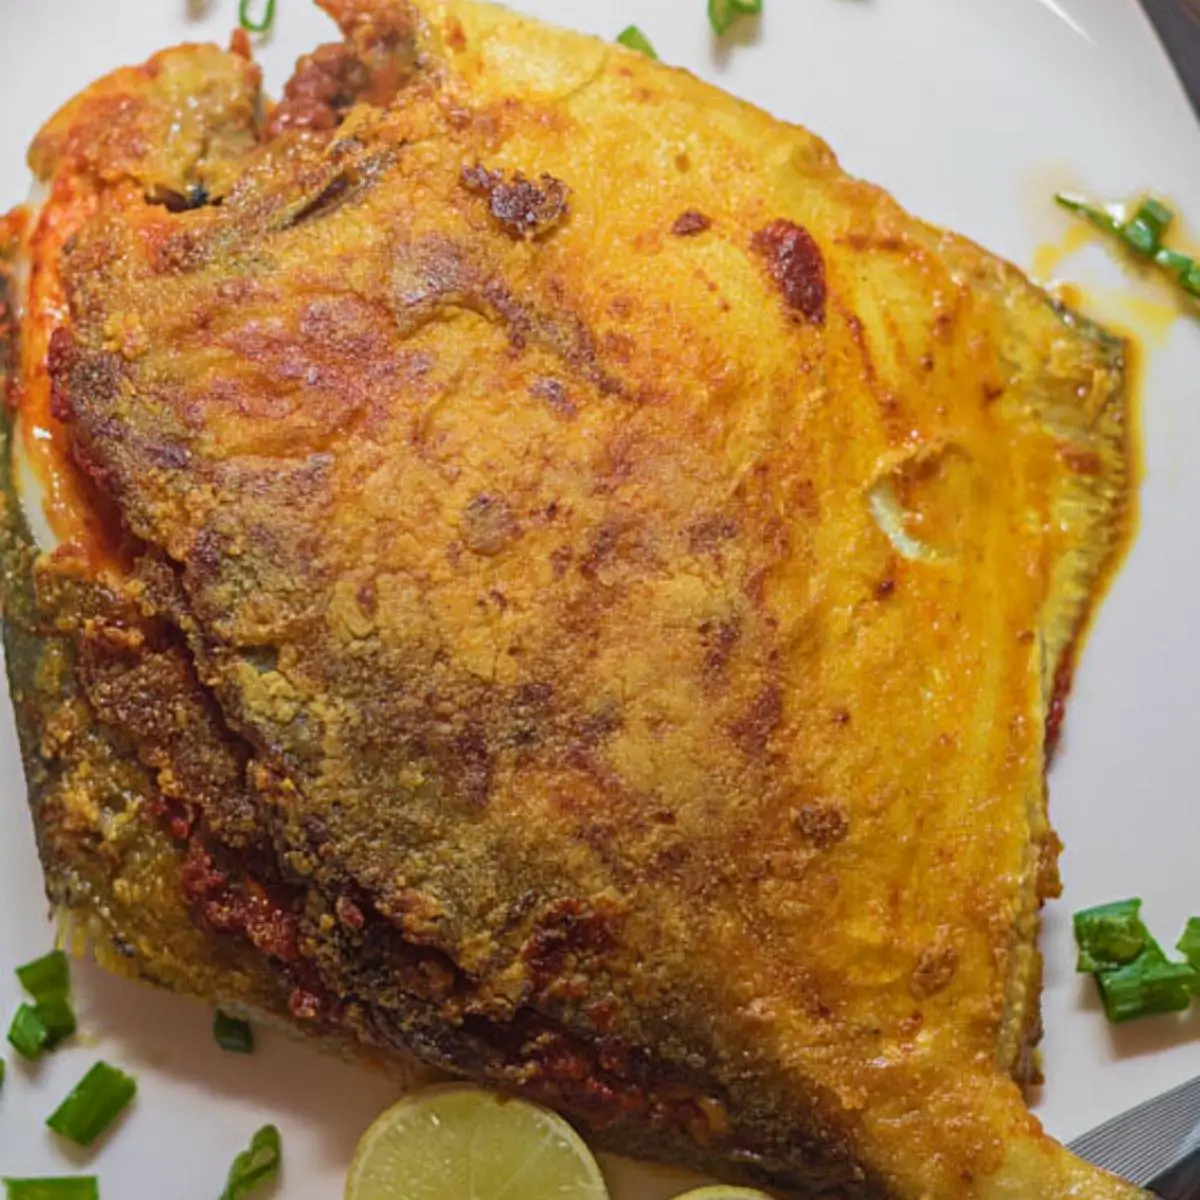 A pomfret with green masala stuffing.